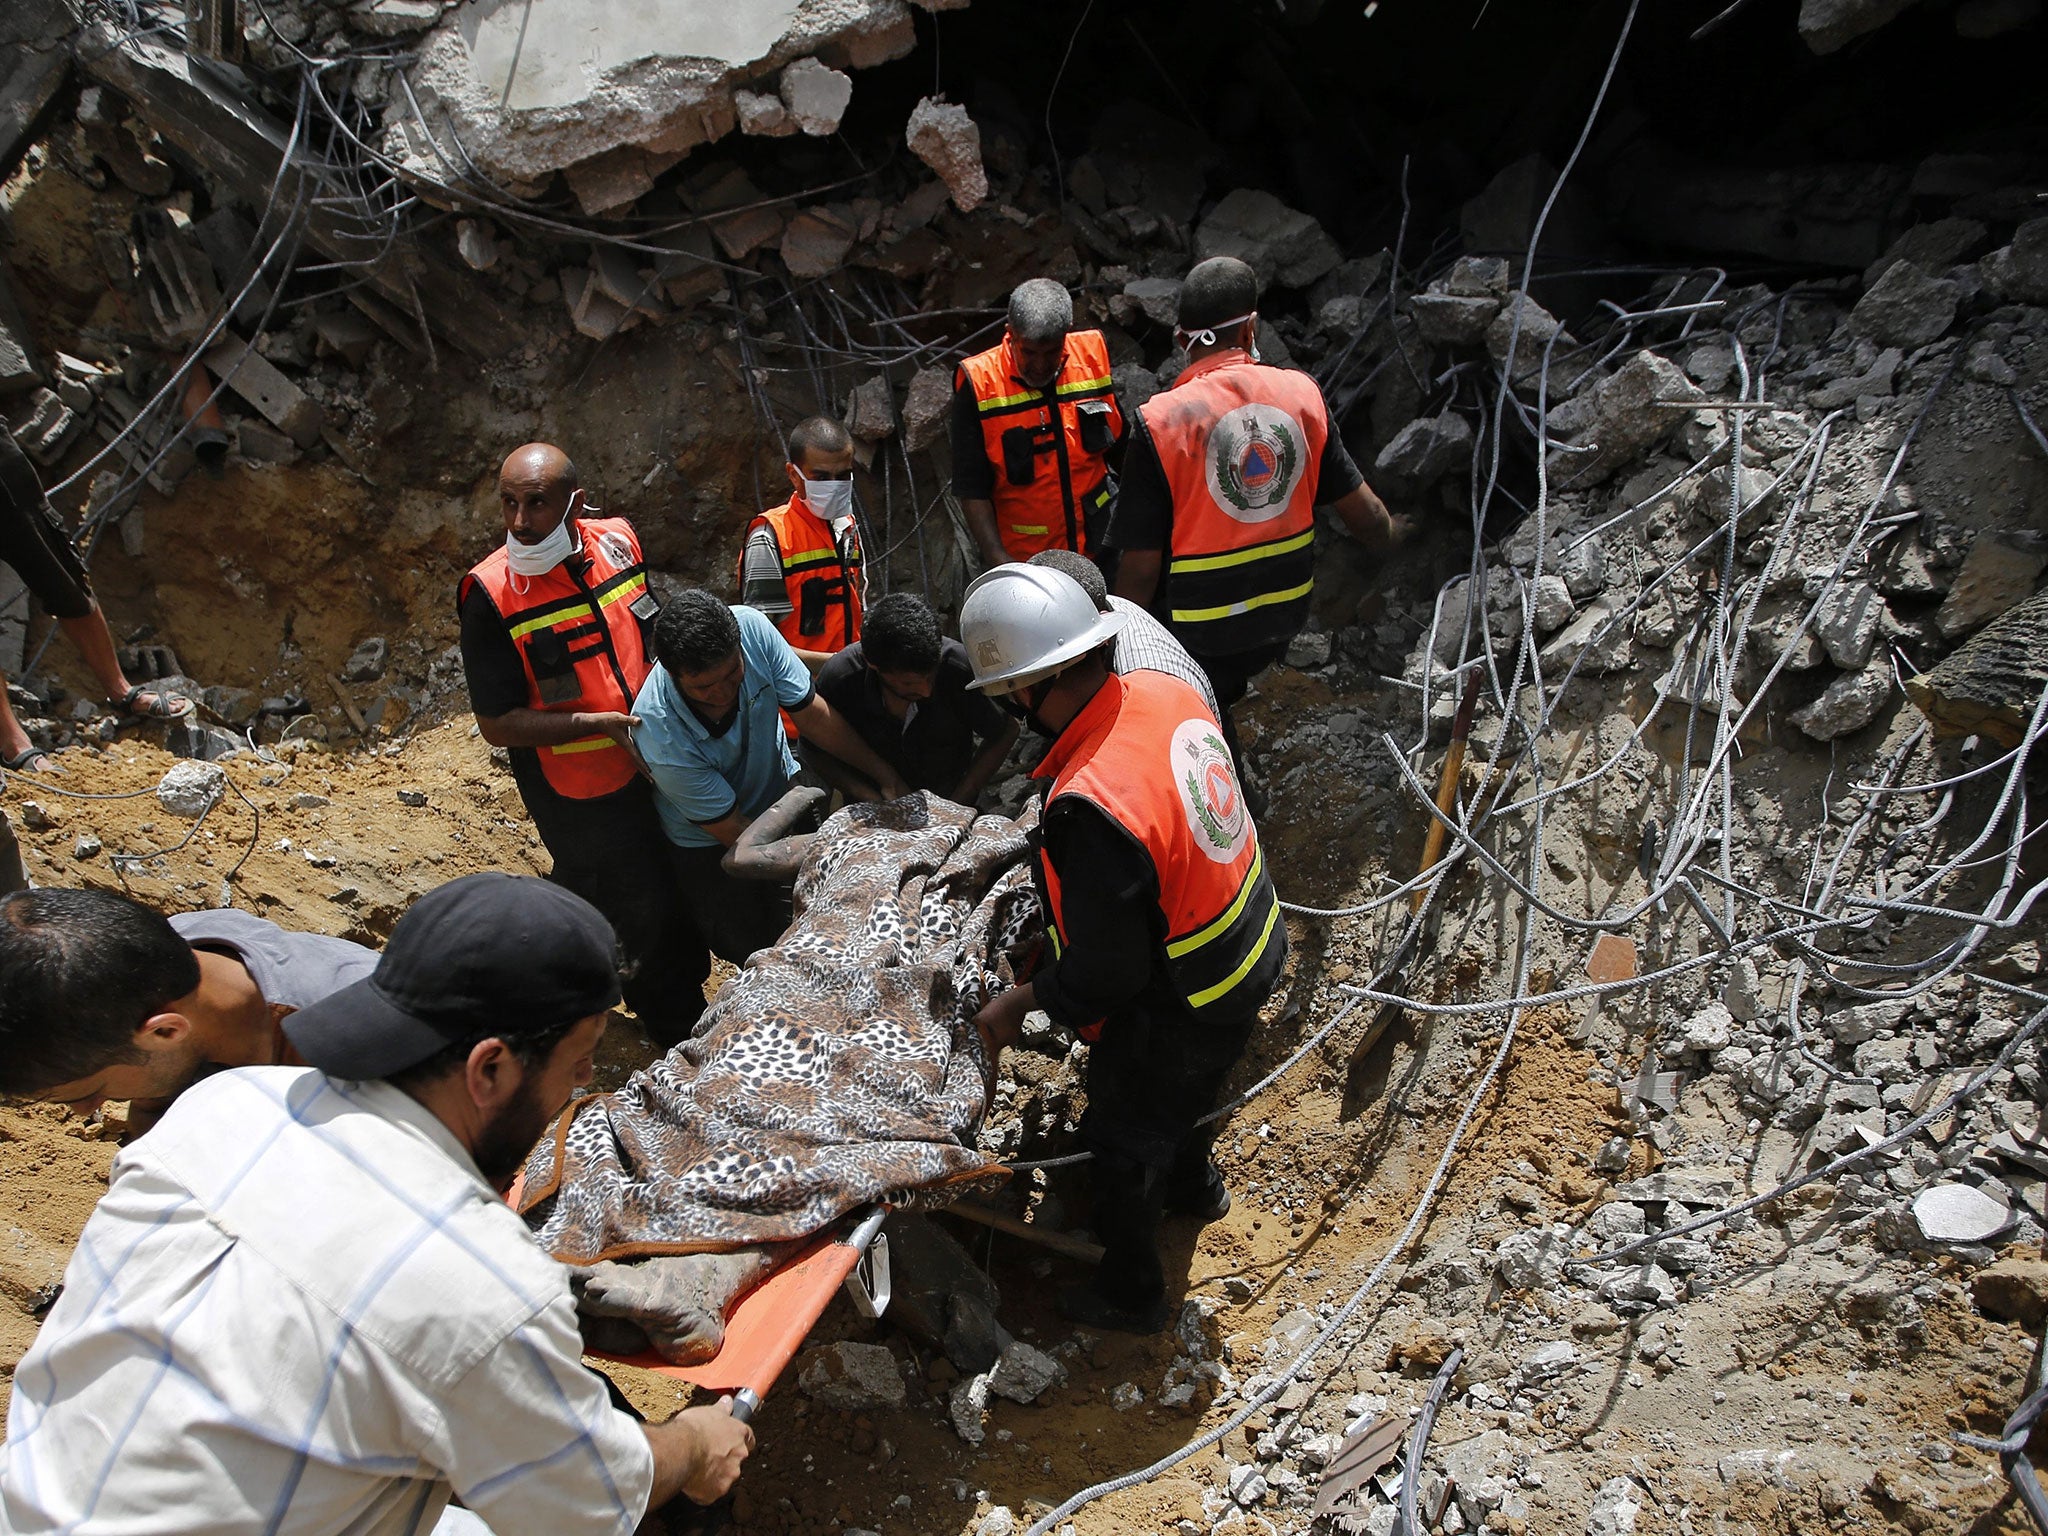 Medics recover a body from a destroyed house in Khan Younis